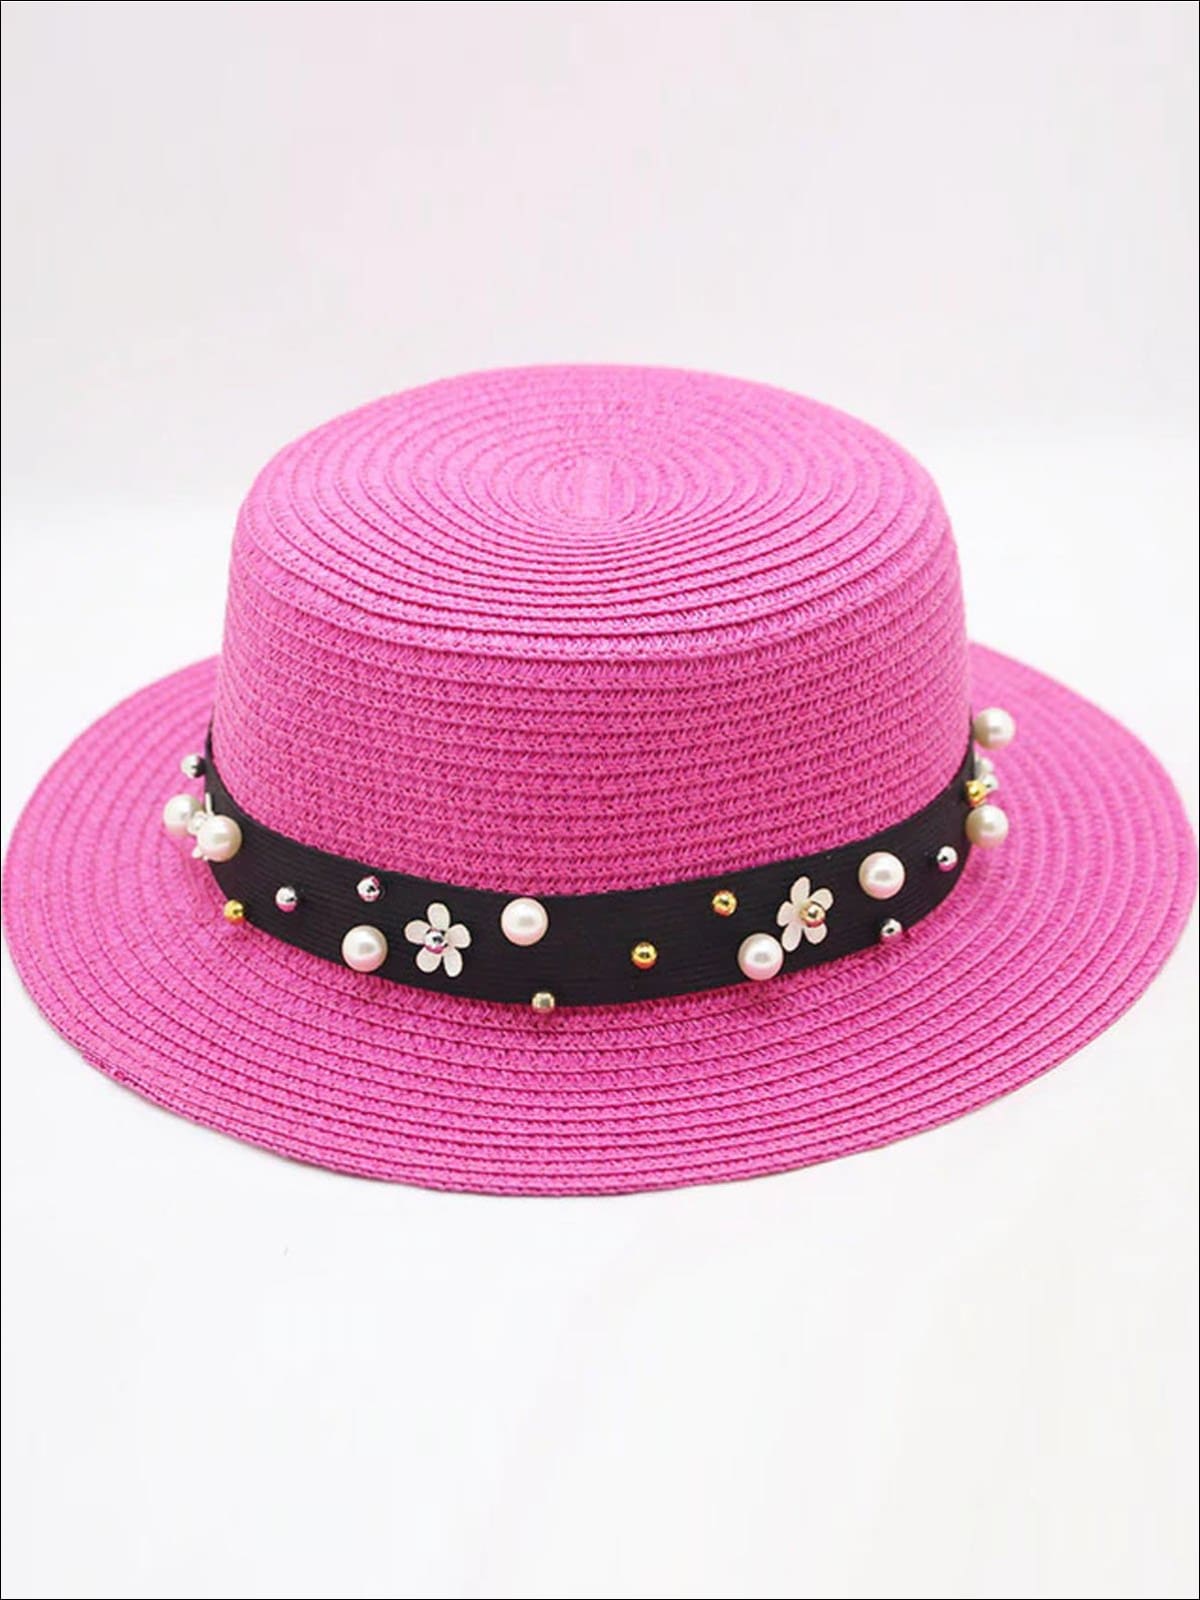 Girls Flower and Pearl Embellished Straw Hat - Hot Pink / One Size - Girls Hats